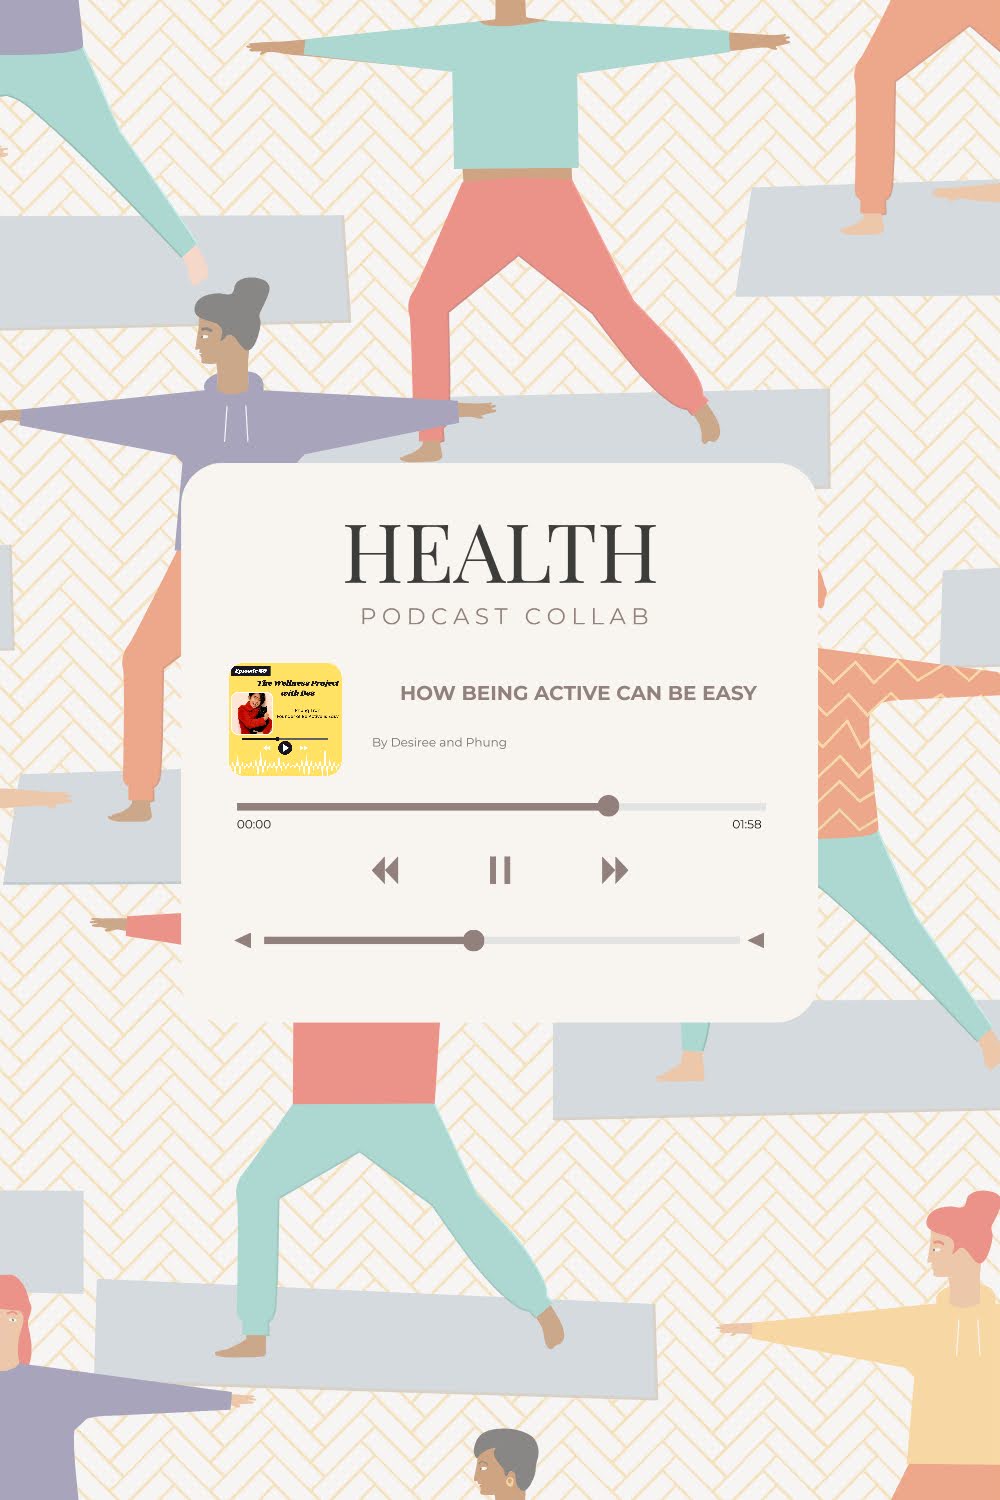 health podcast collab: how to make being active super easy with Desiree Argentina